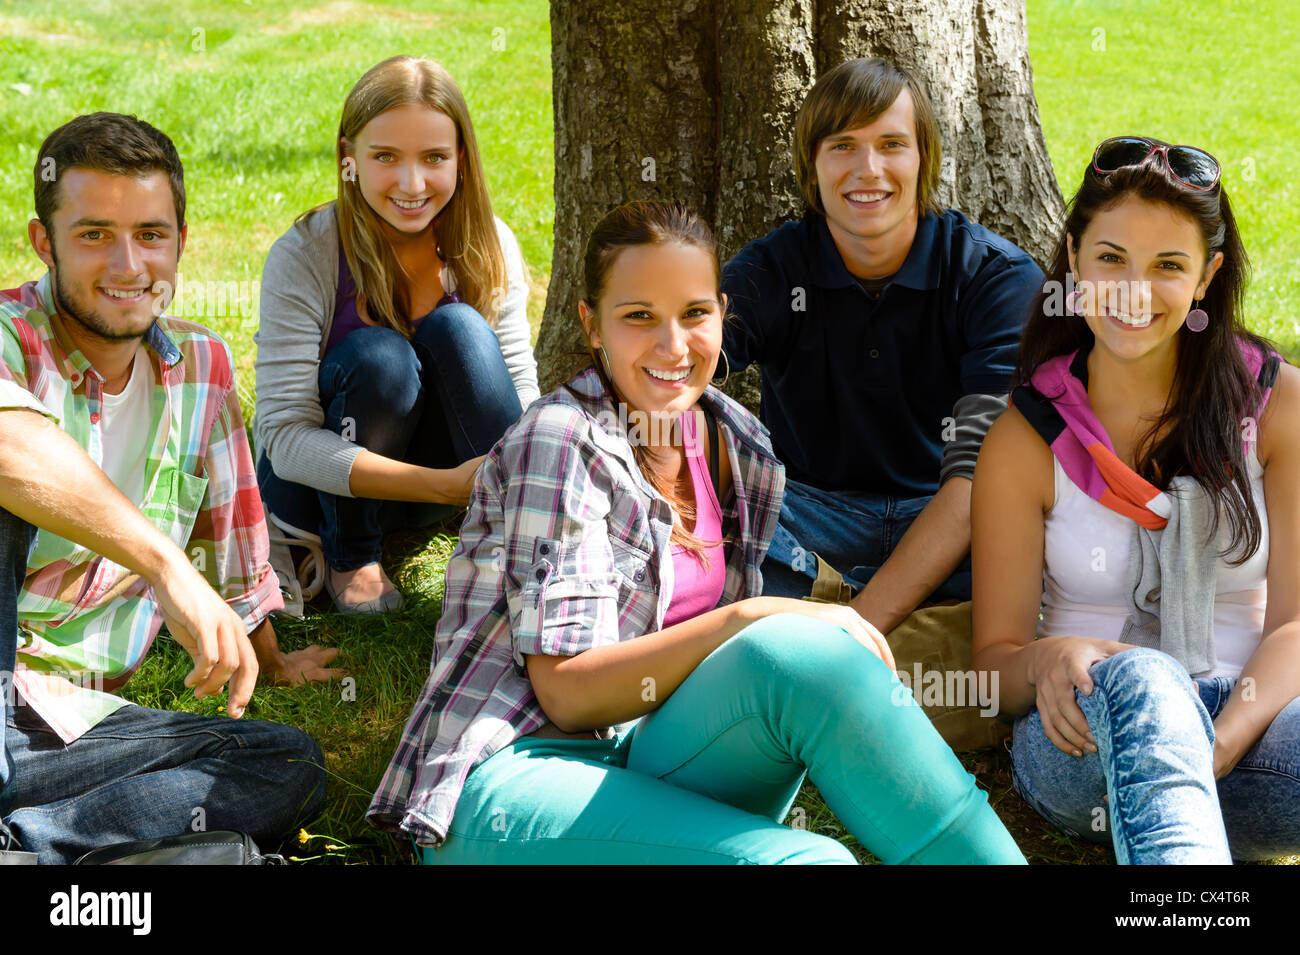 Students relaxing on meadow in adolescents happy group leisure park Banque D'Images